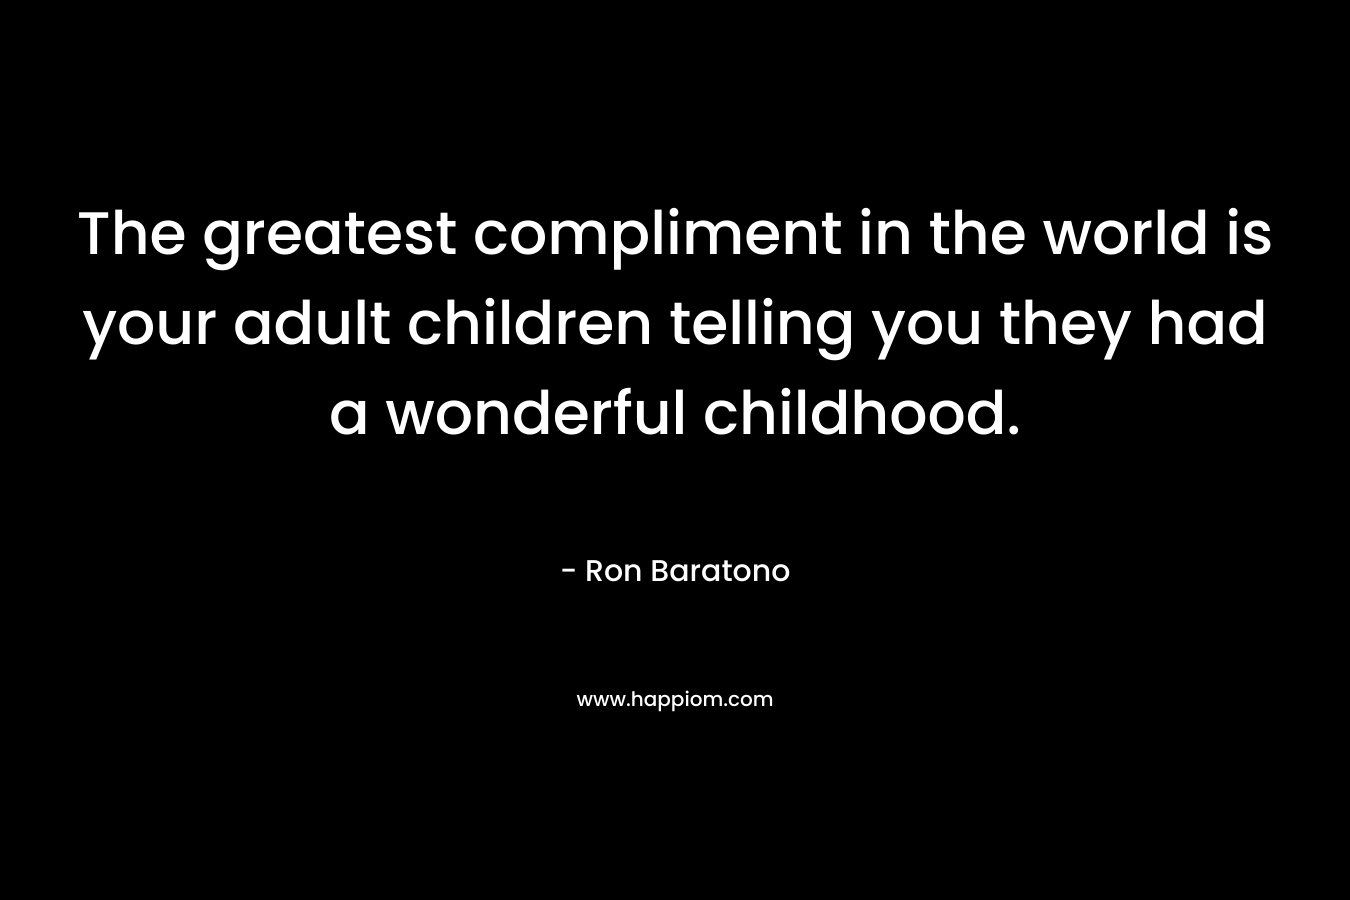 The greatest compliment in the world is your adult children telling you they had a wonderful childhood. – Ron Baratono